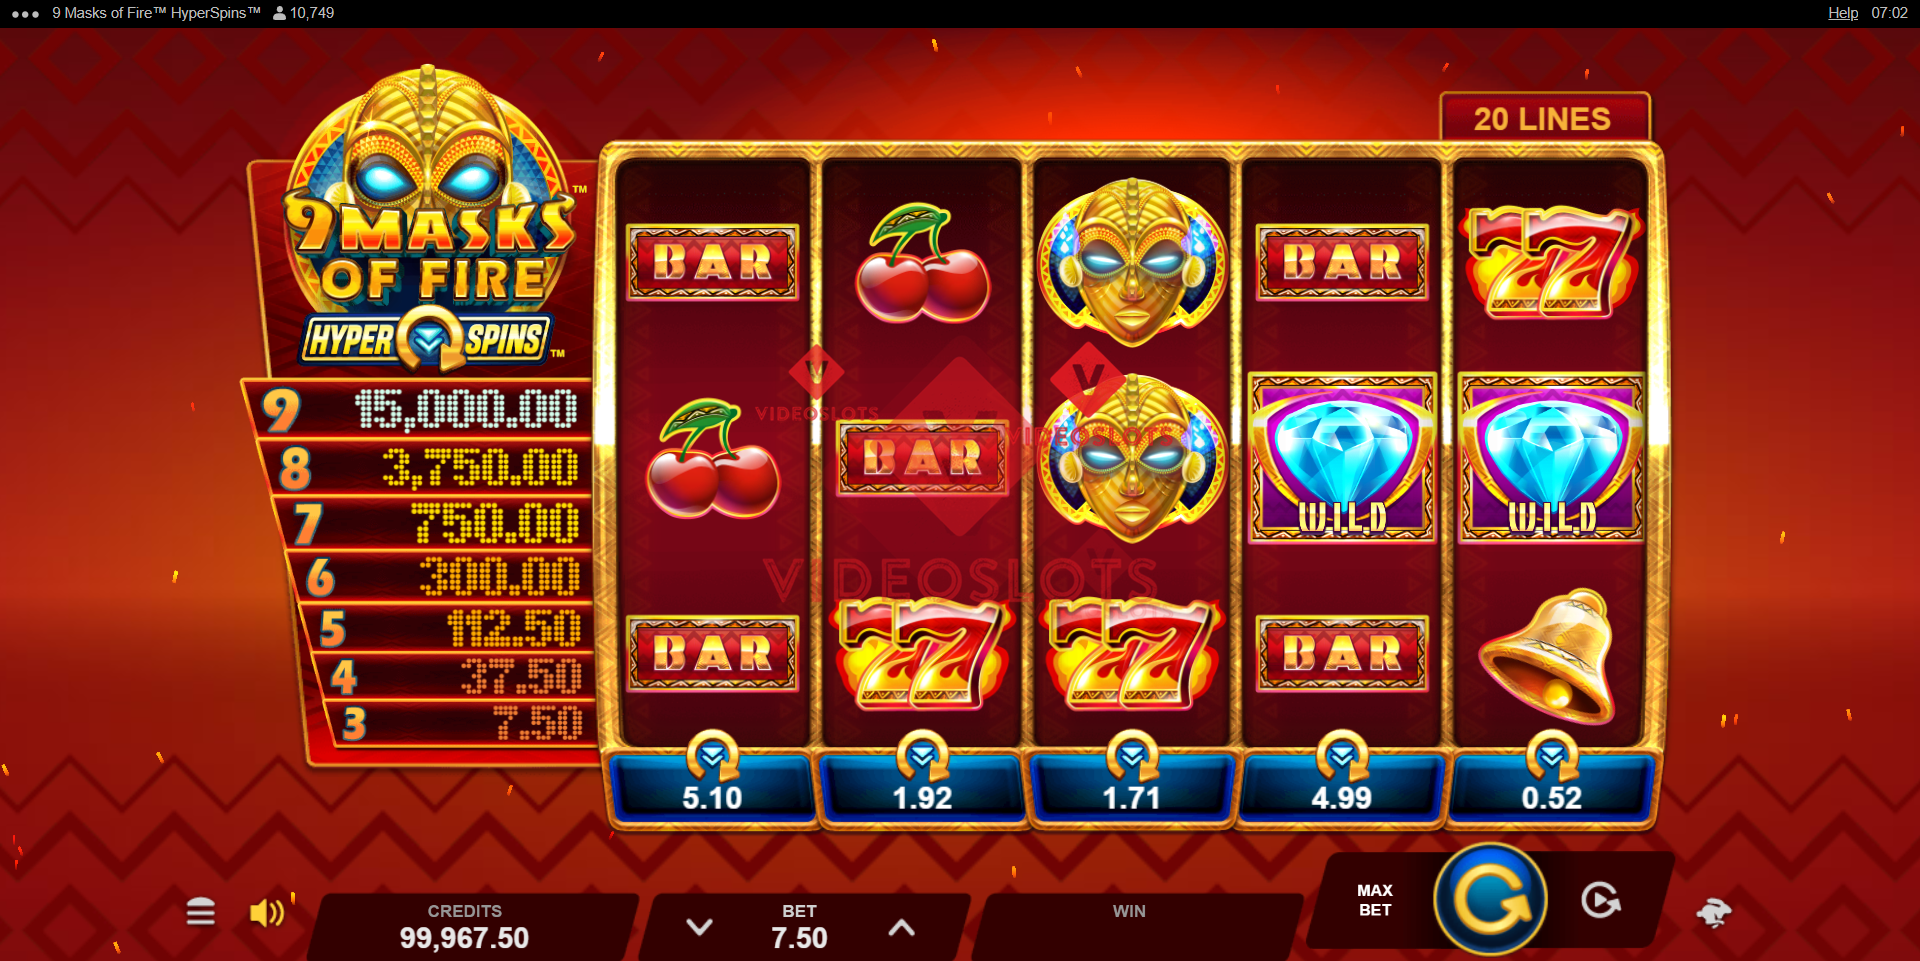 Base Game for 9 Masks of Fire HyperSpins slot for Microgaming